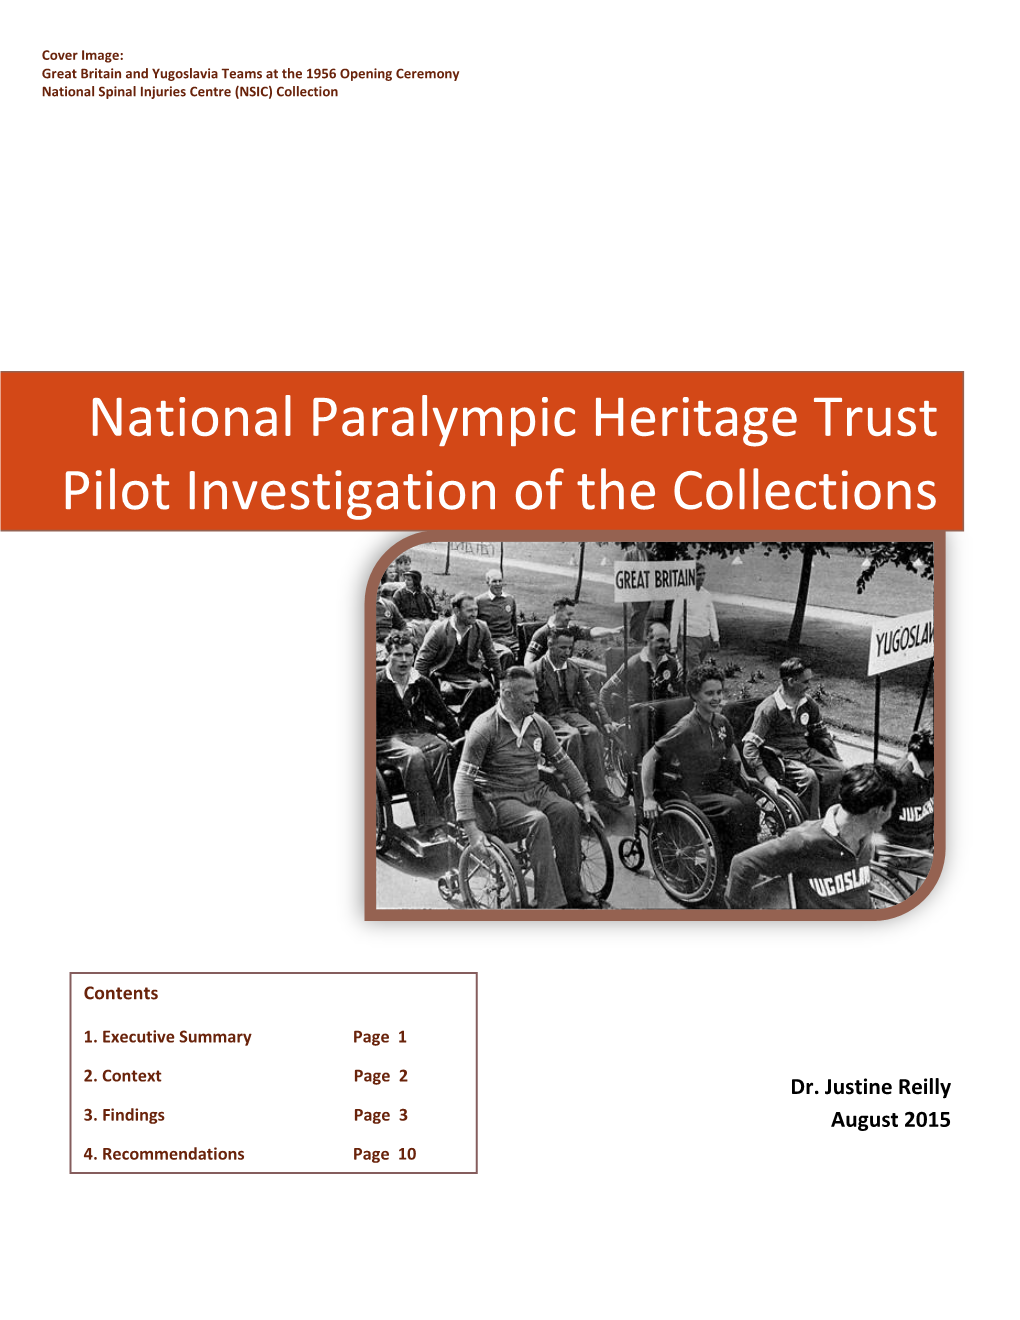 National Paralympic Heritage Trust Pilot Investigation of the Collections